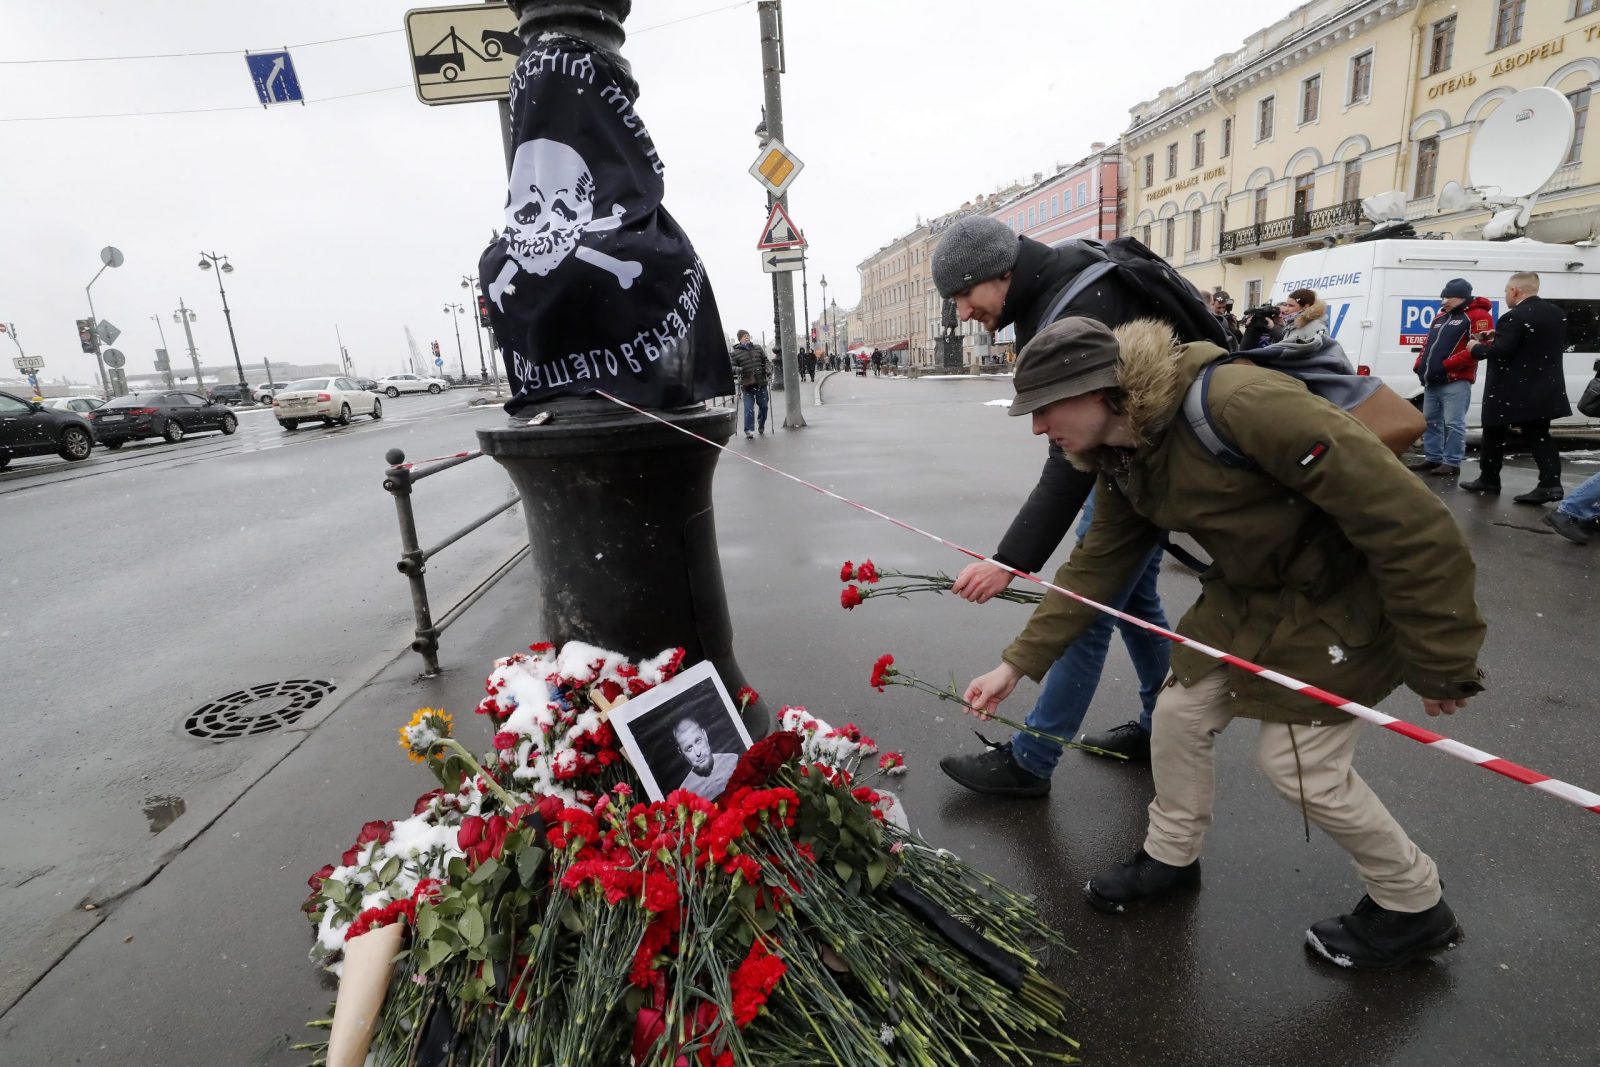 epa10556941 Men lay flowers at a makeshift memorial for Russian military blogger Vladlen Tatarsky, who was killed in the April 02 bomb blast in a cafe, in St. Petersburg, Russia, 03 April 2023. According to Russia's Ministry of Internal Affairs, as a result of the explosion, blogger Vladlen Tatarsky, whose real name is Maxim Fomin, died and at least thirty people were injured.  EPA/ANATOLY MALTSEV